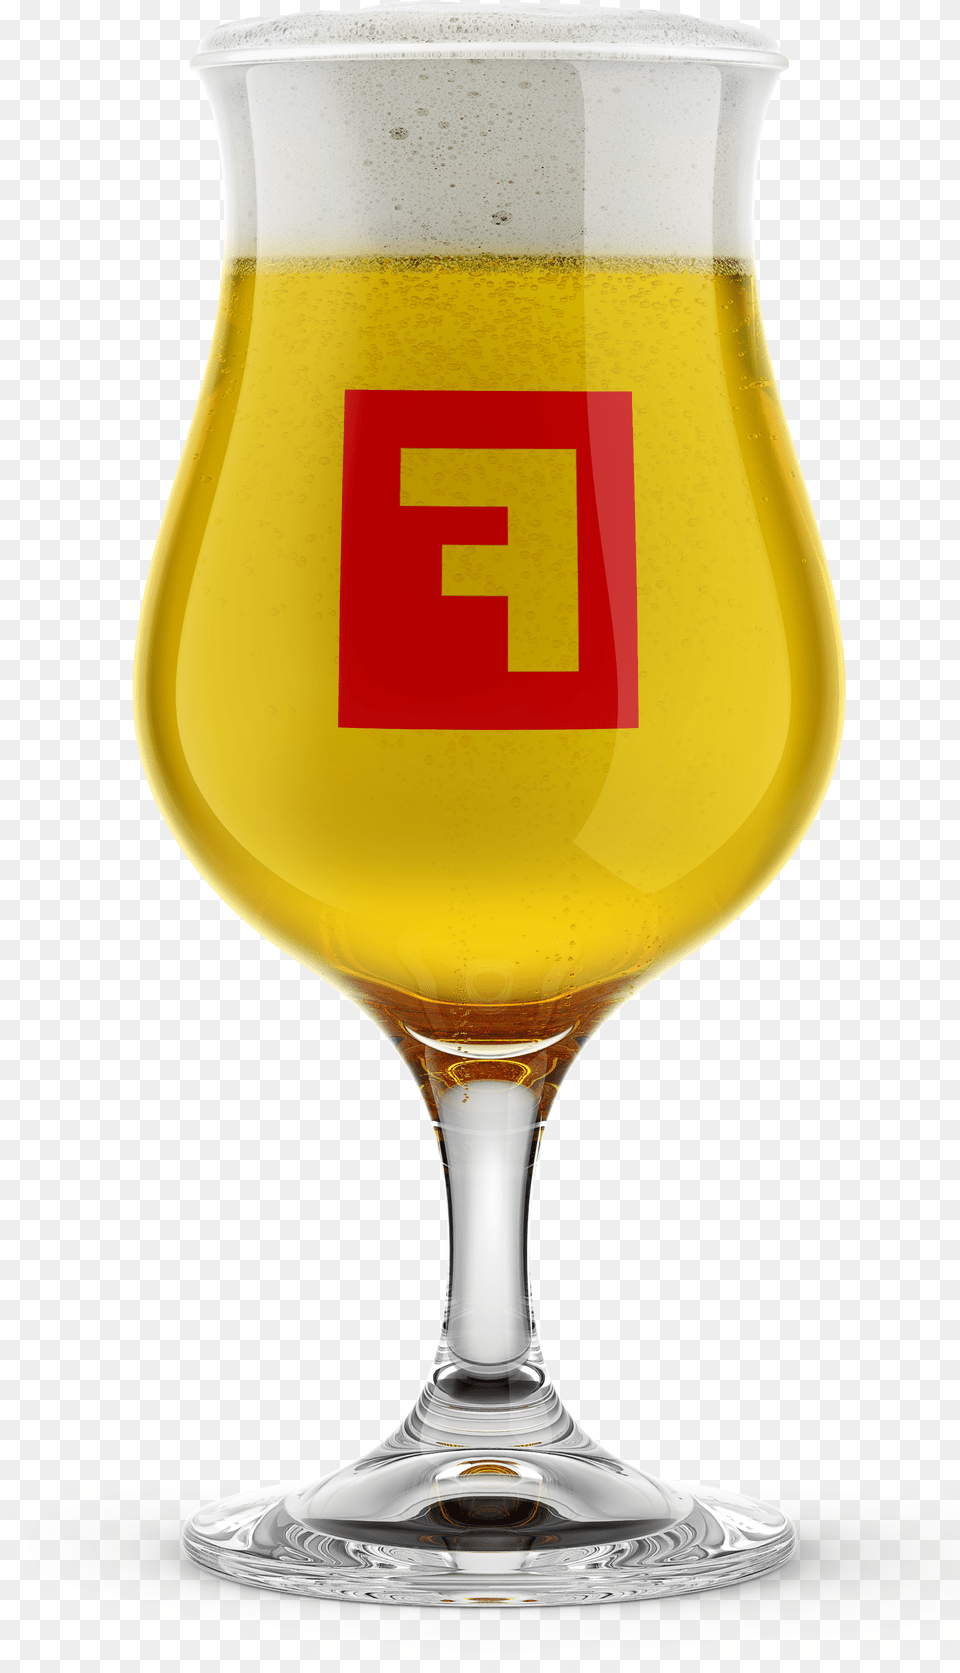 Edge Bahama Beer, Alcohol, Beverage, Glass, Beer Glass Png Image